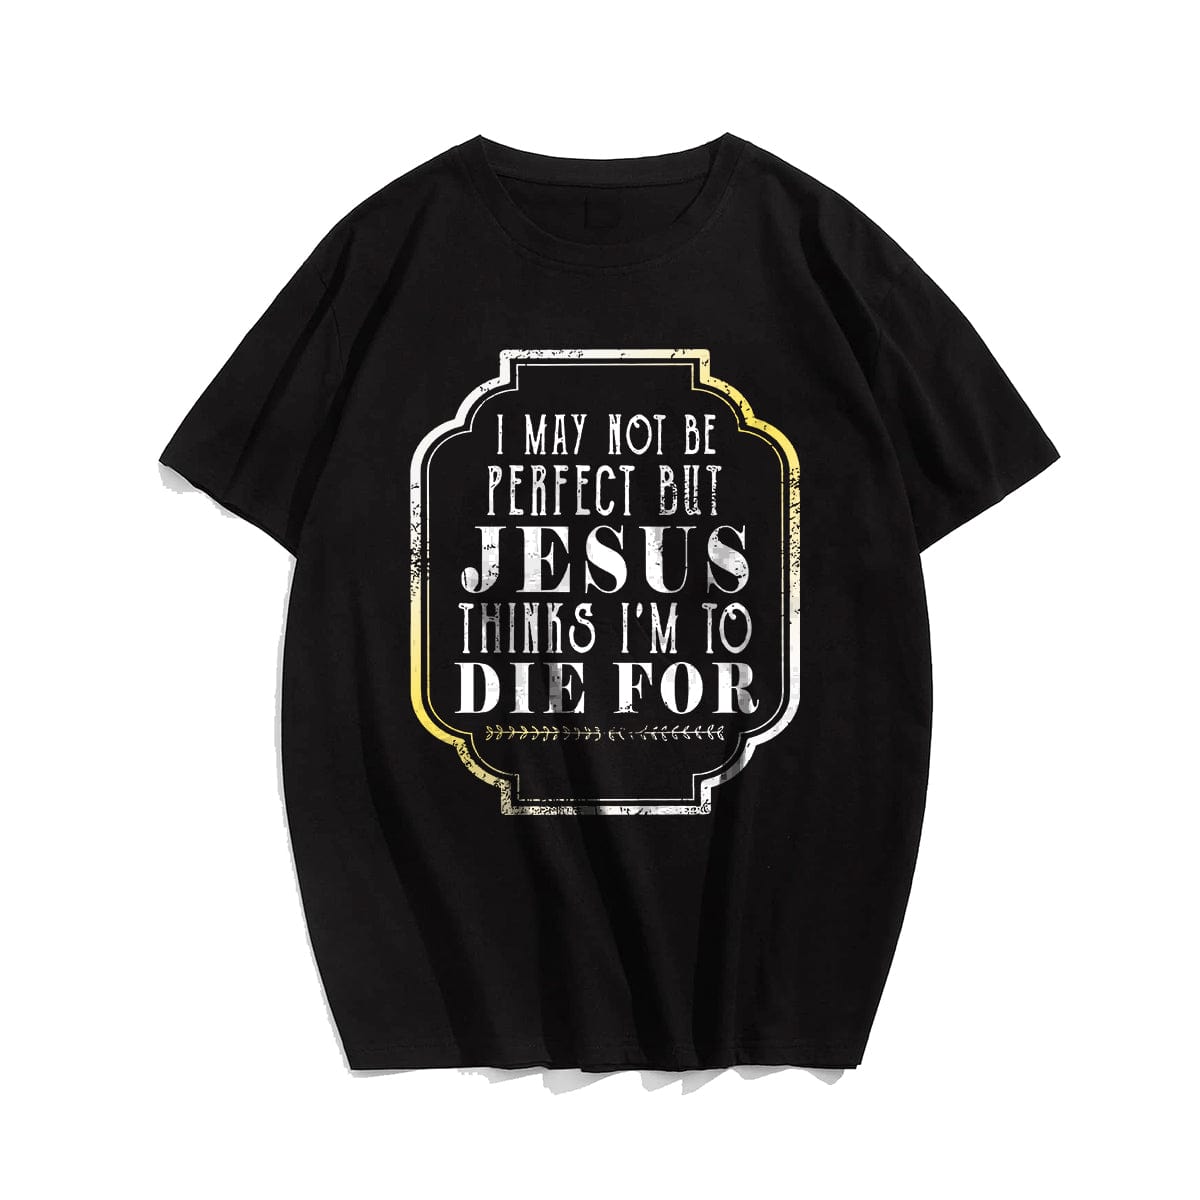 I May Not Be Perfect But Jesus Thinks I'm To Die For (Version 2) Men's T-Shirts